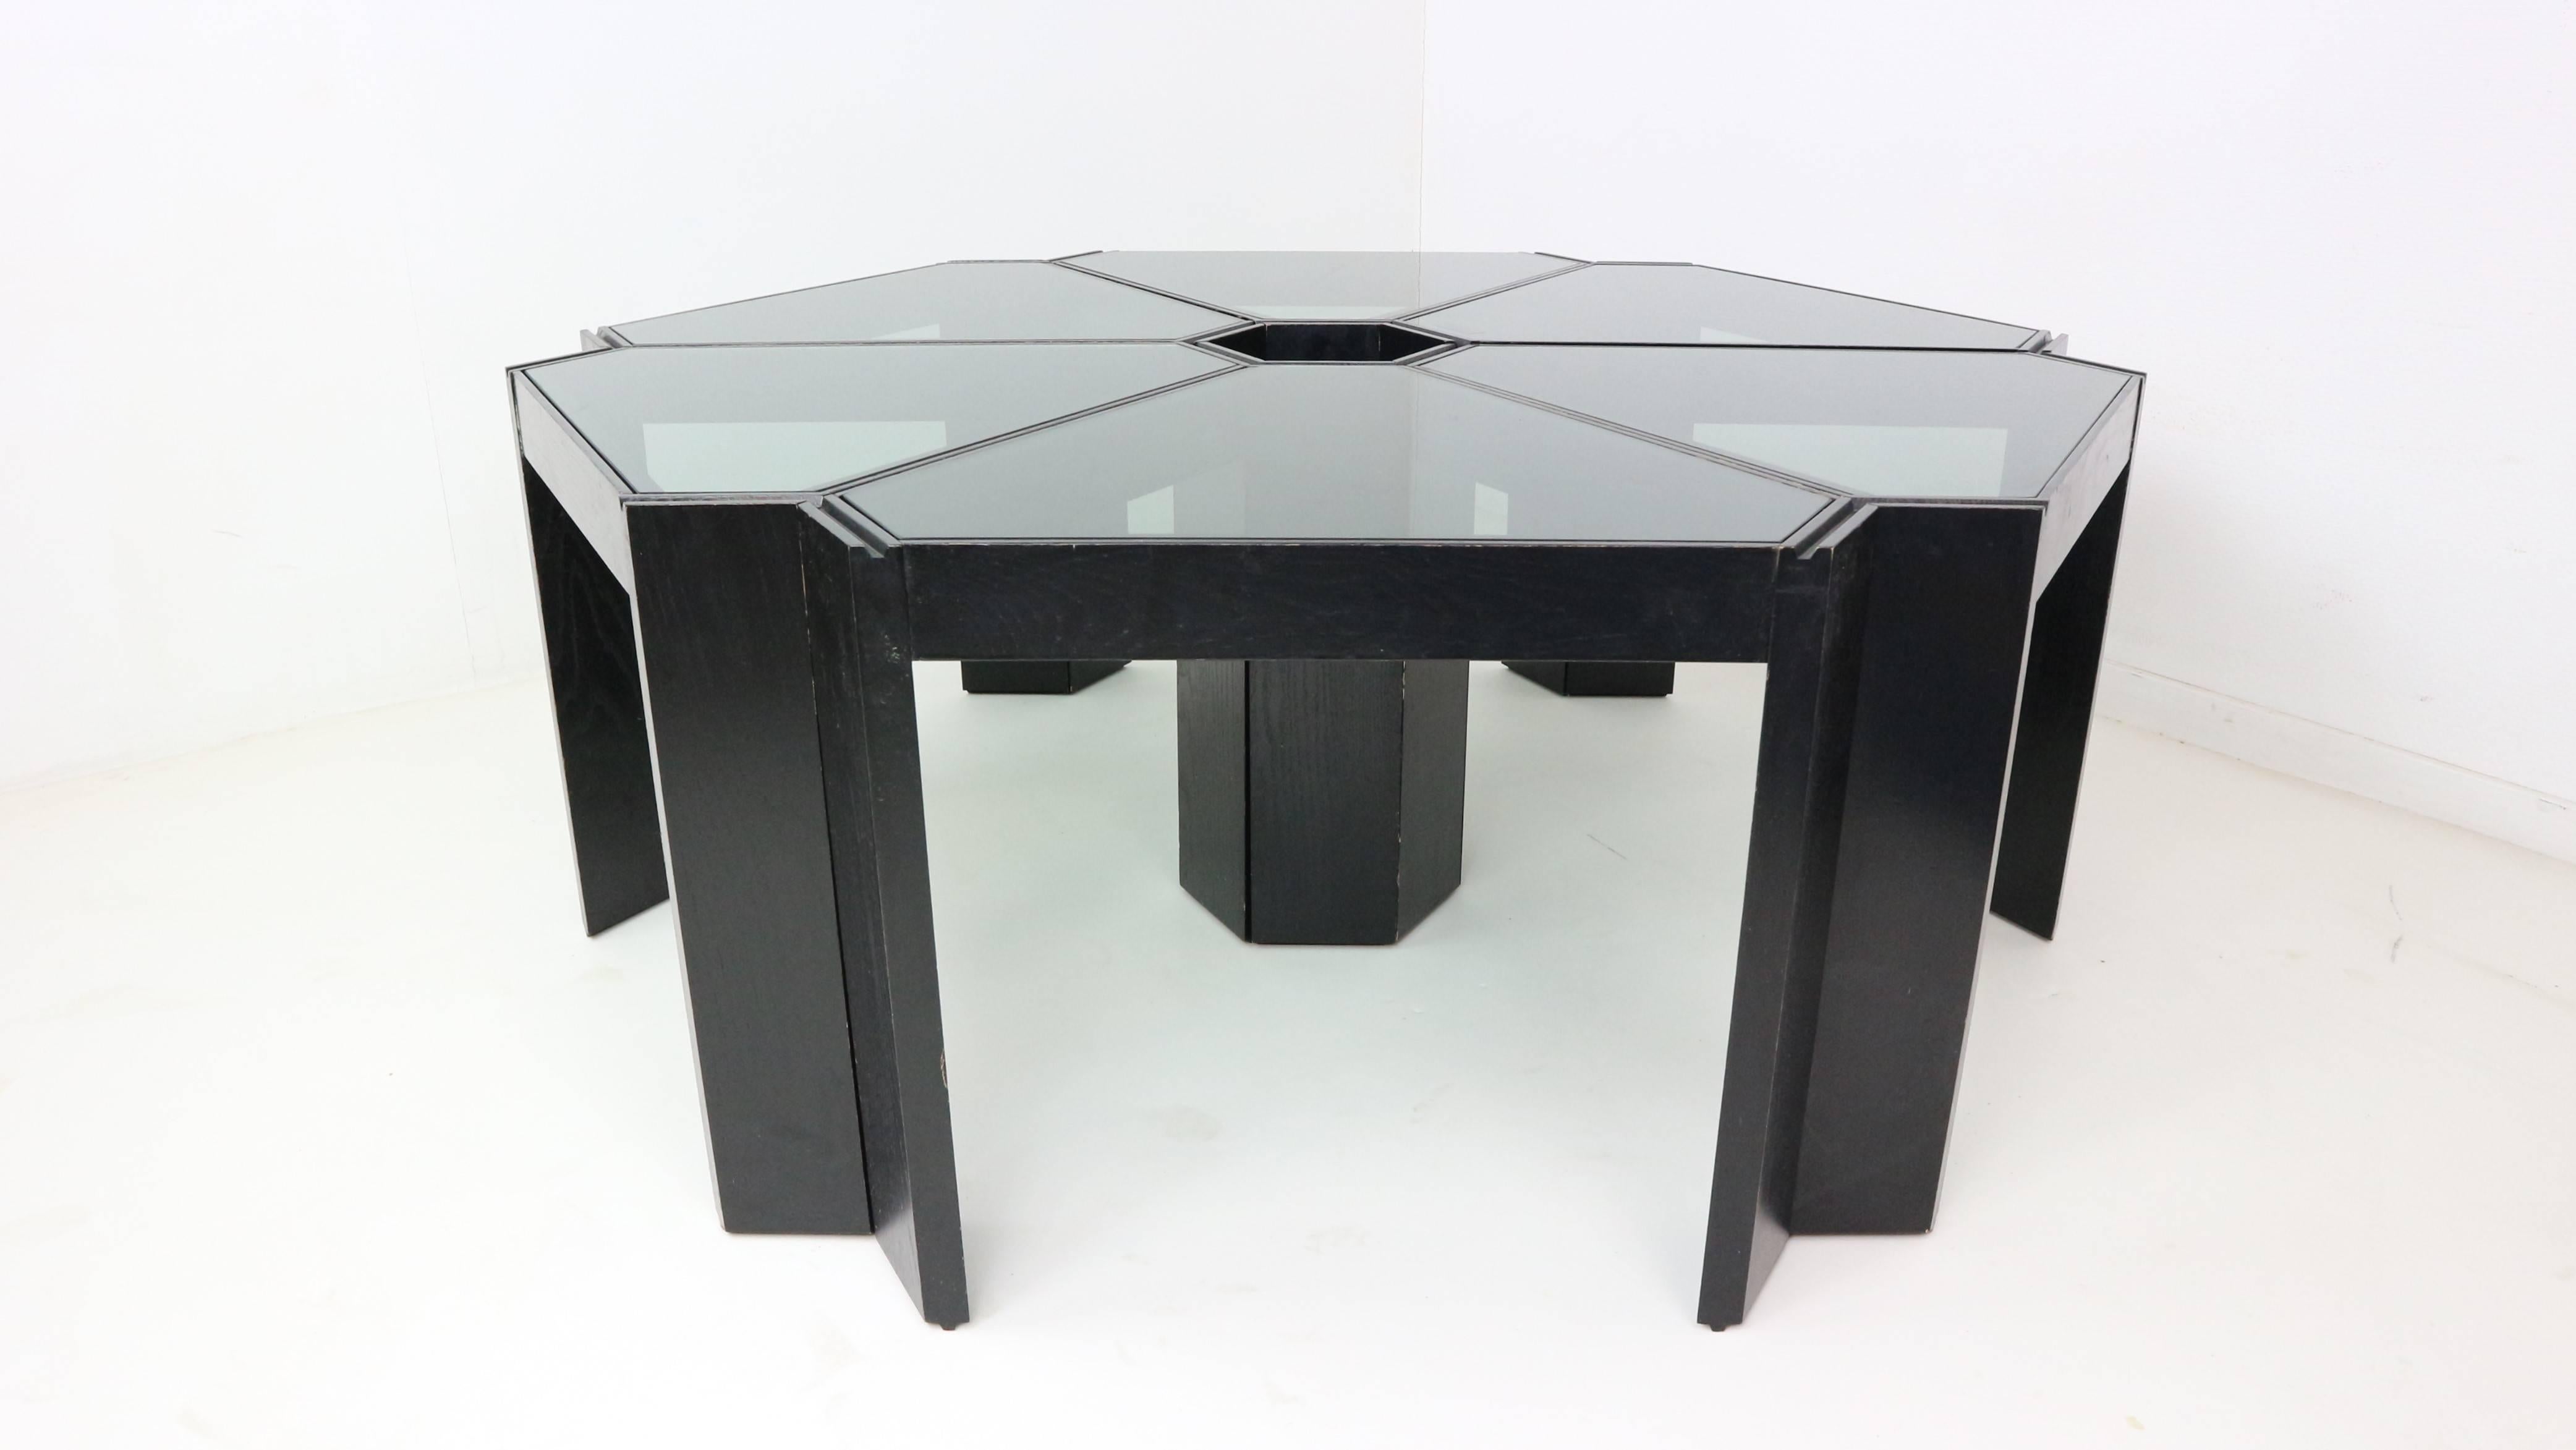 These six stacking tables were made by Porada Arredi in Italy, they can be arranged in many different ways.
The frames are made of black lacquered Wenge wood and the tops of smoked glass.
 